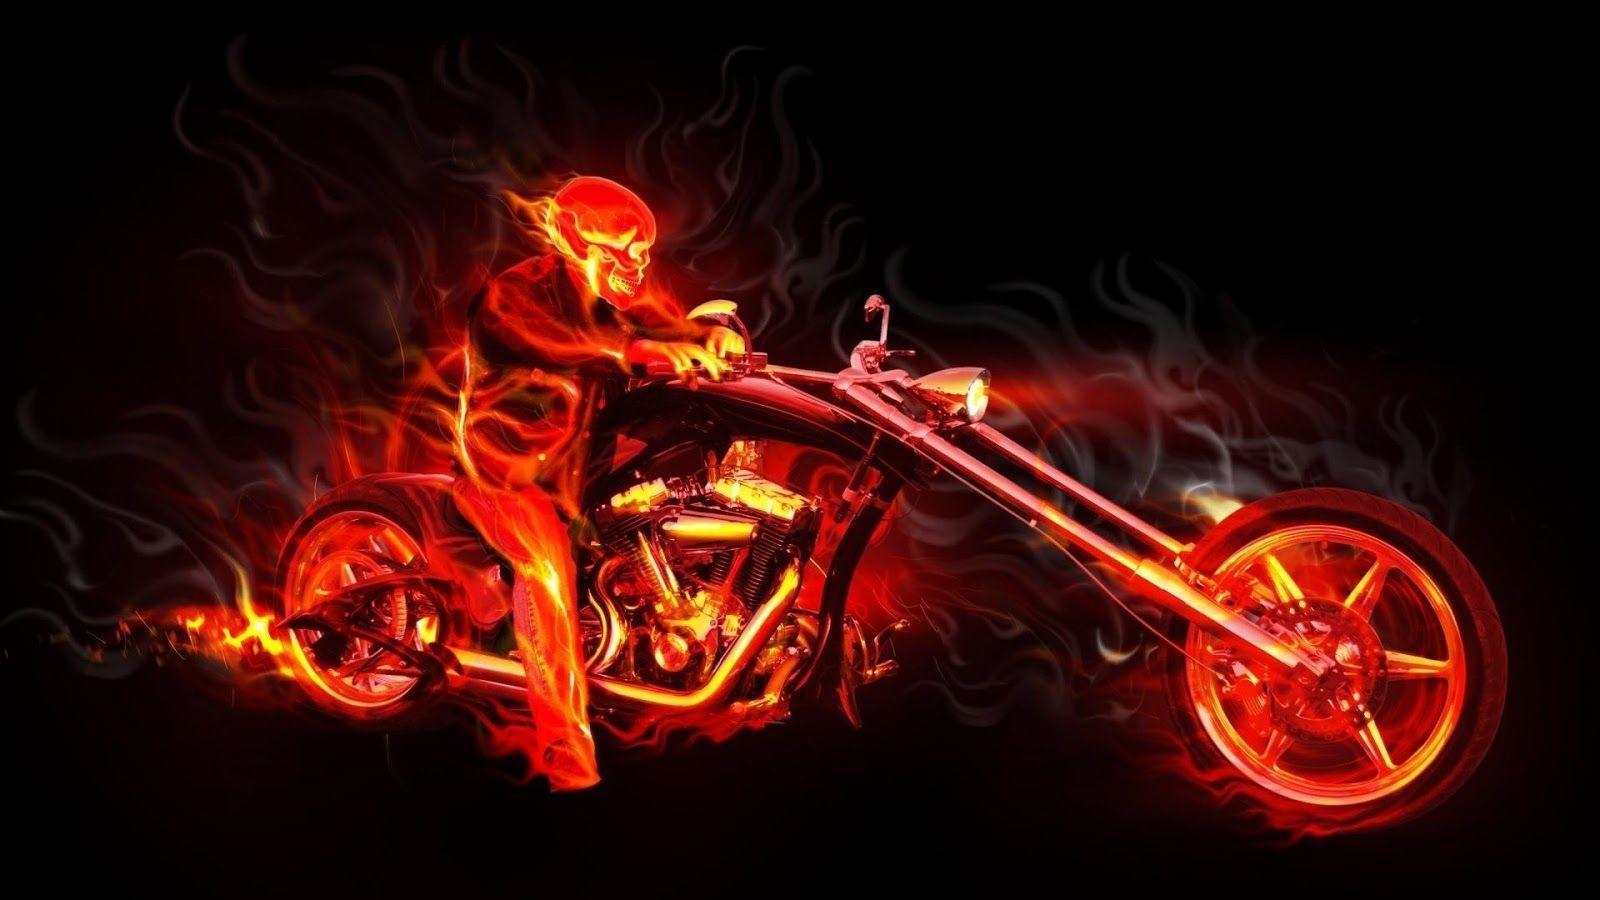 Blue And Red Flaming Skulls. File Name, Motorcycle Skull Flames